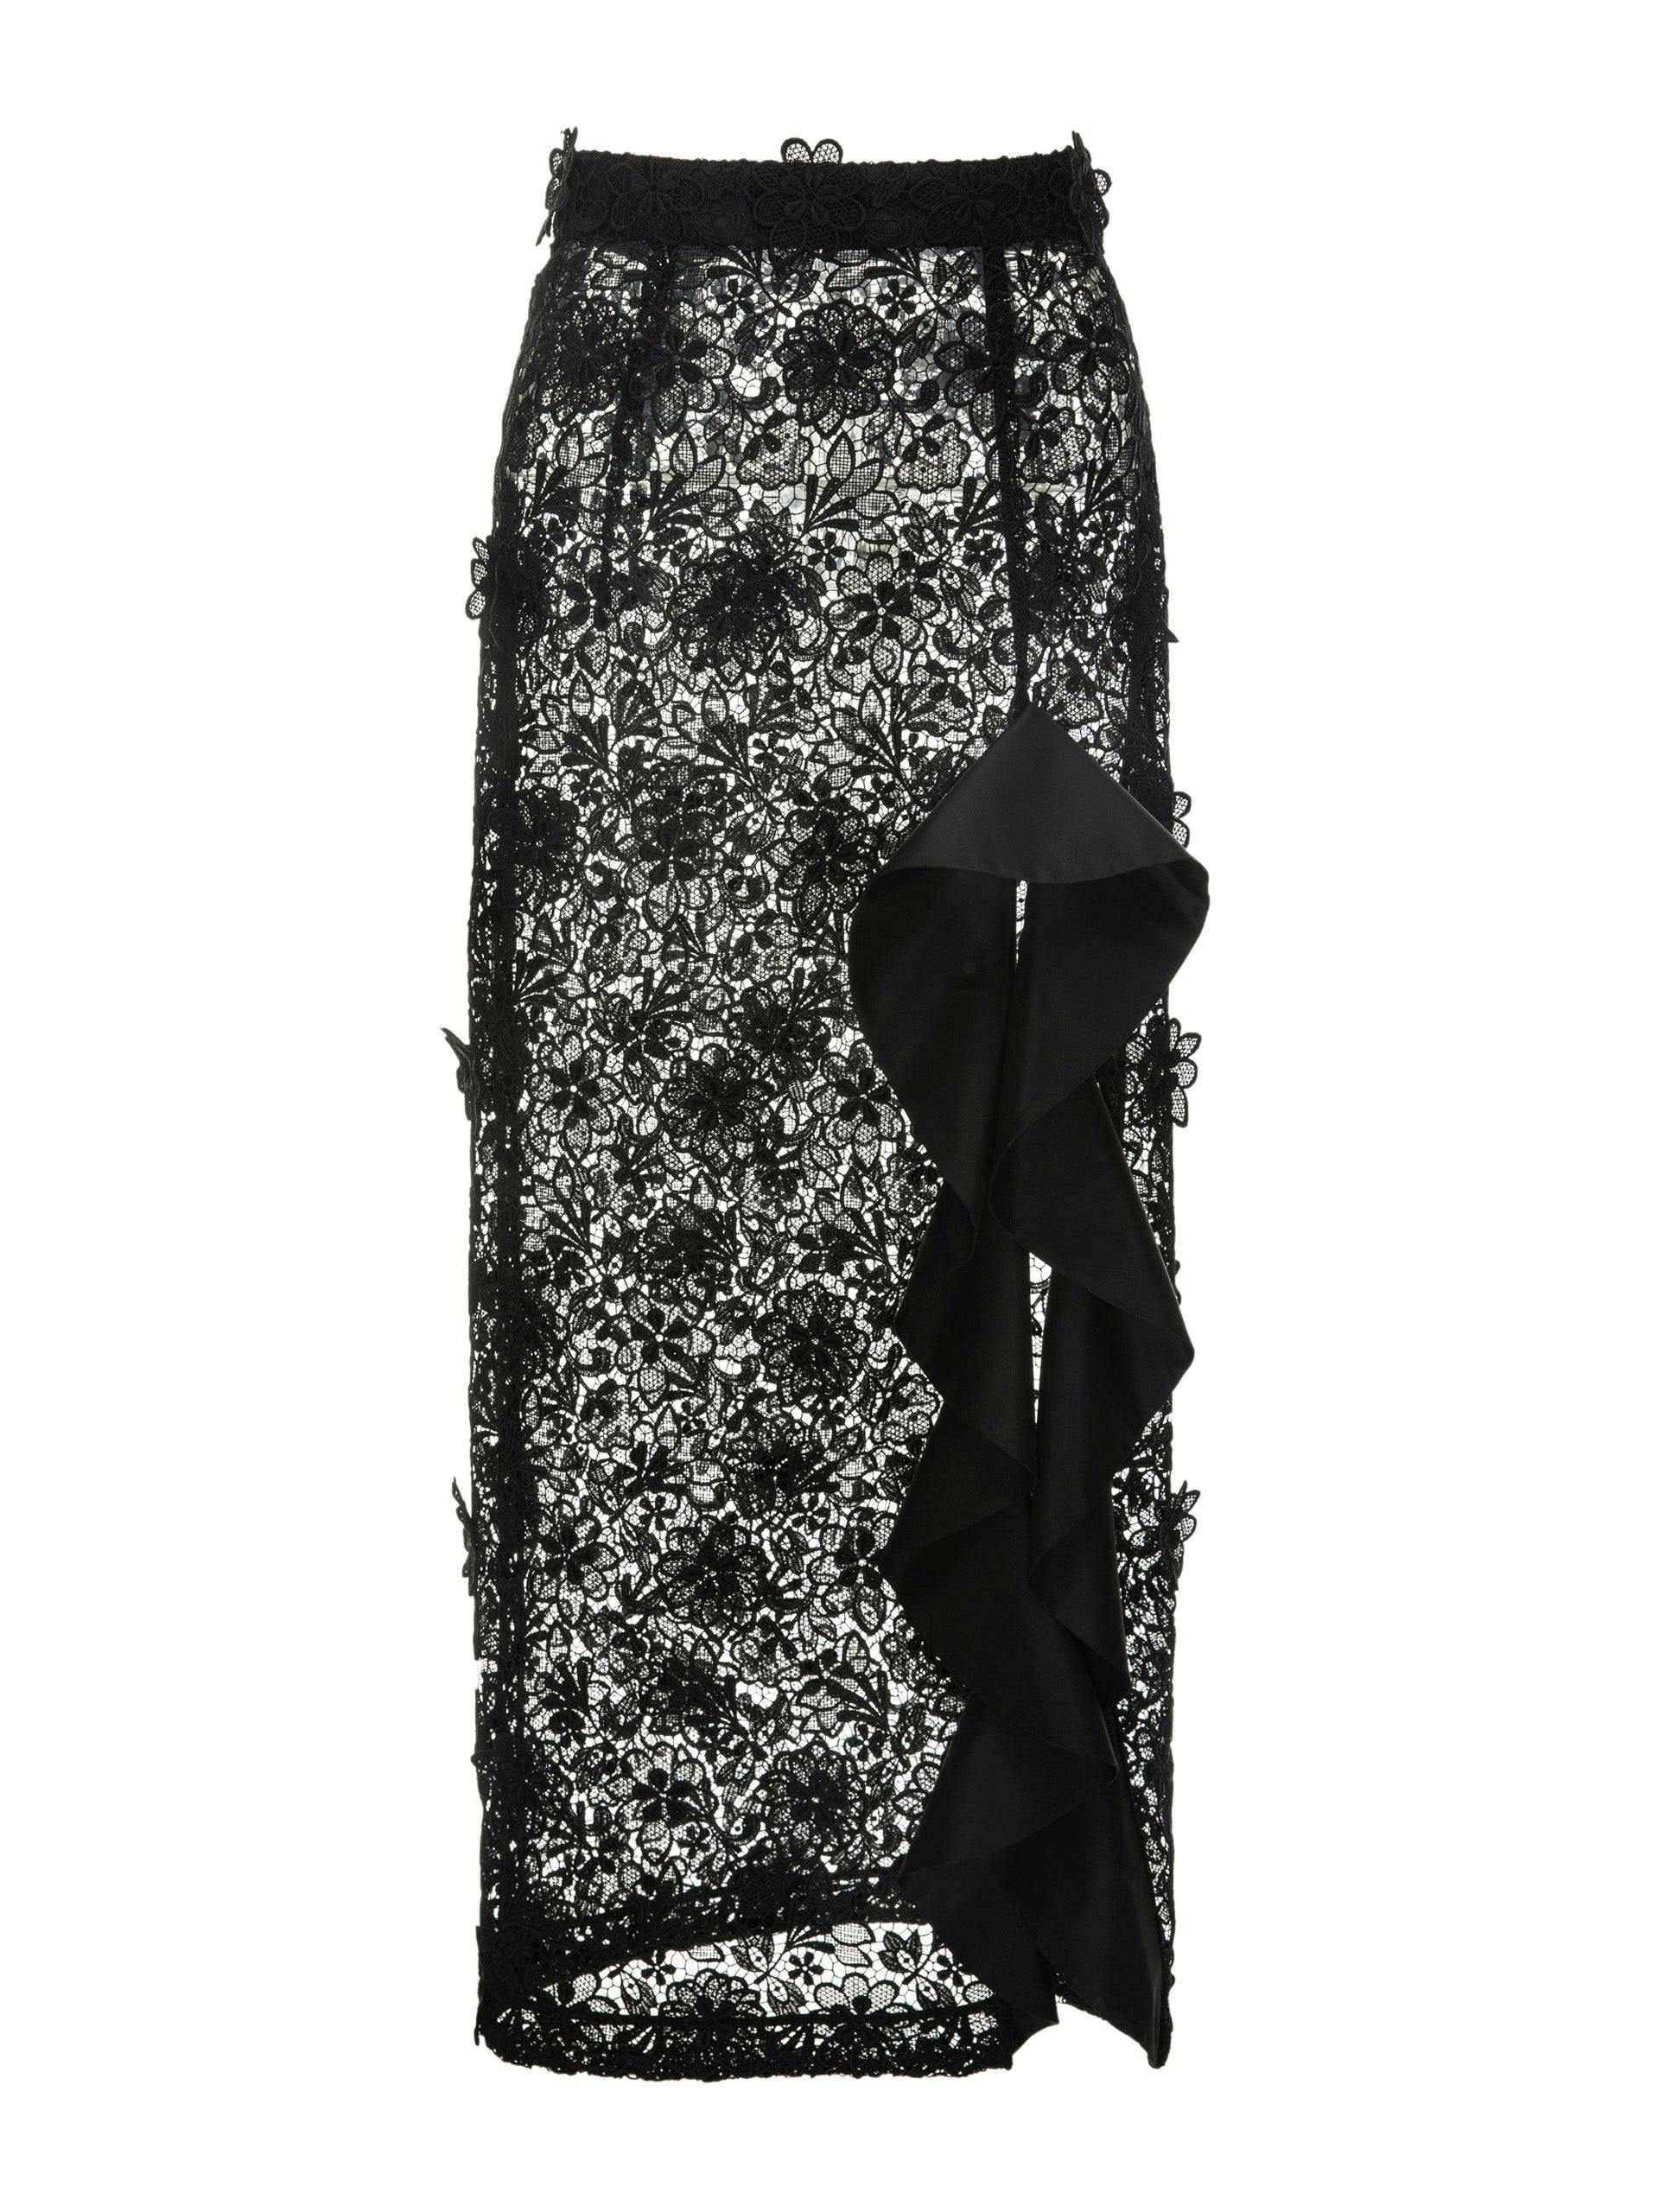 Lined black lace Diane skirt